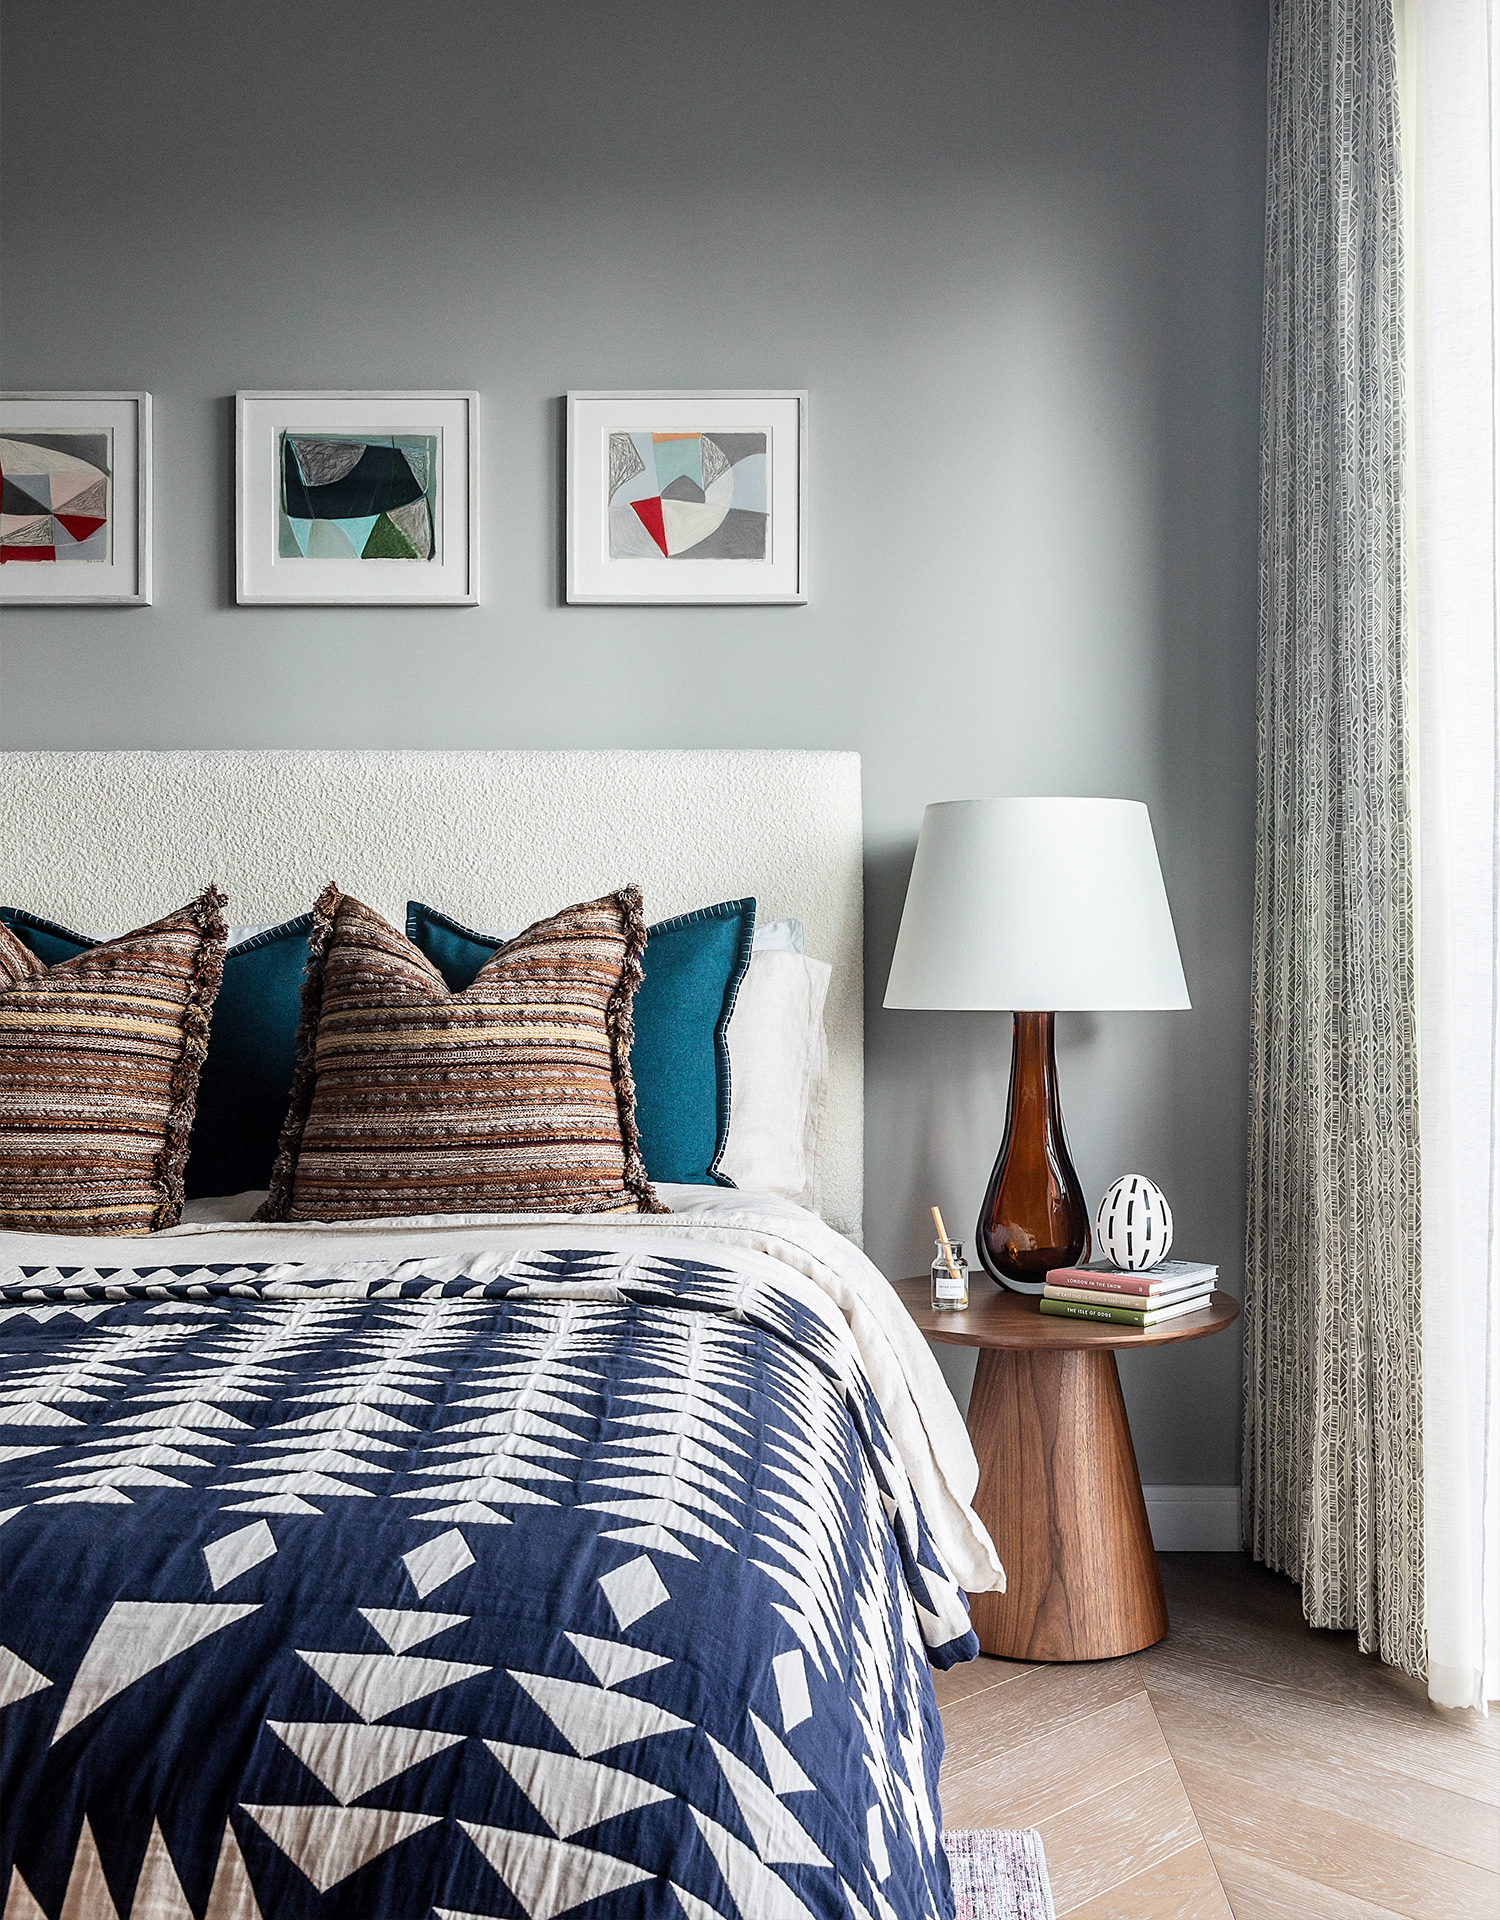 101 on Cleveland | Guest bedroom with bold textures and patterns | Angel O'Donnell